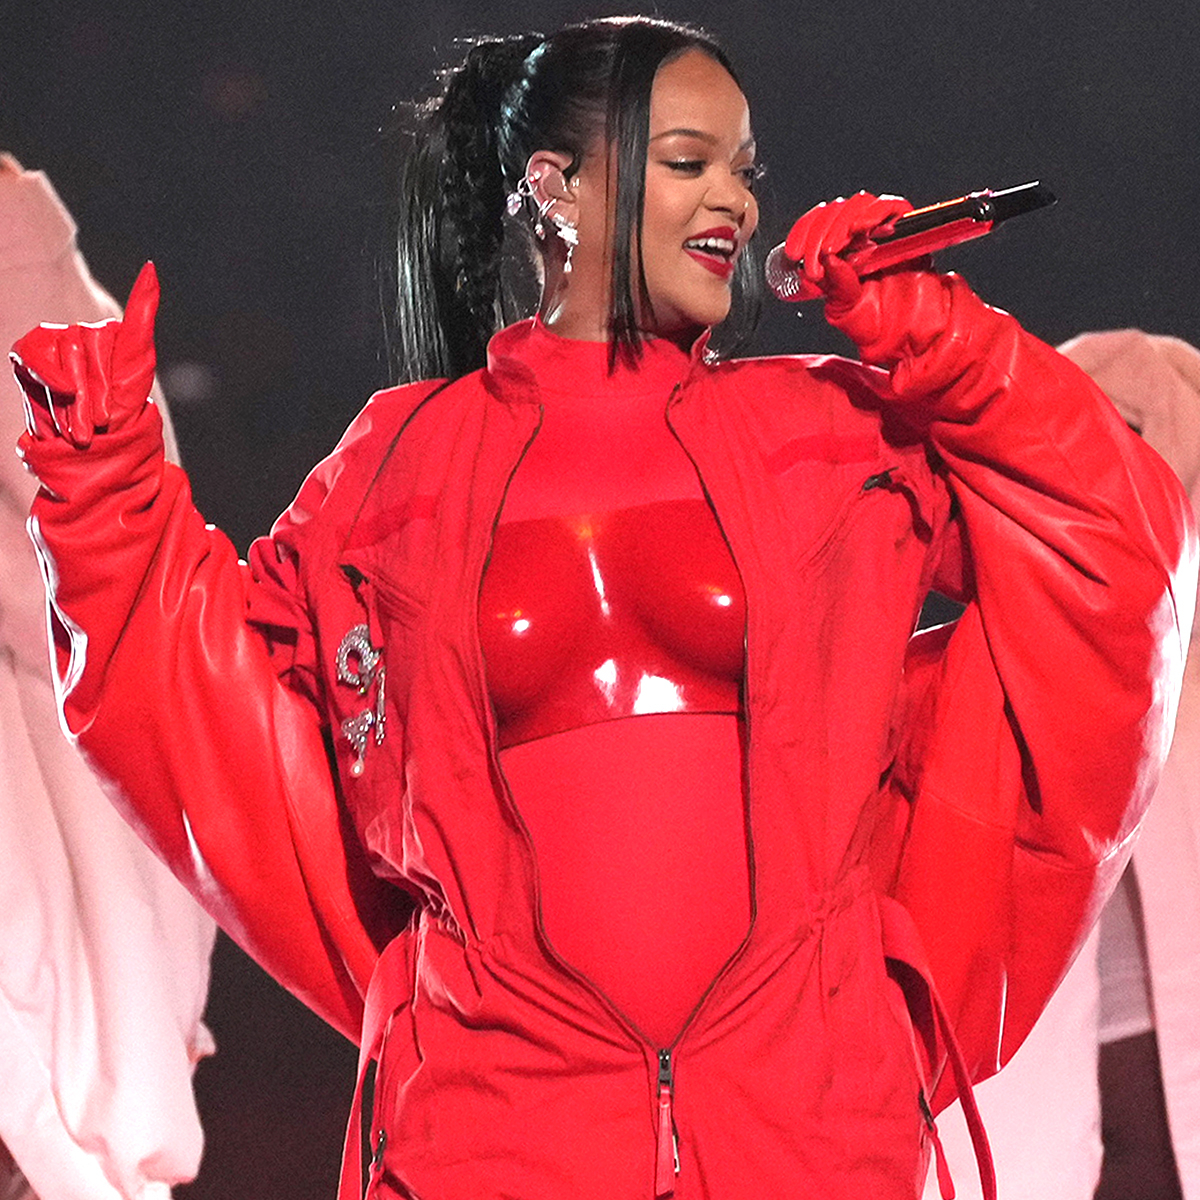 A baby wasn't the only thing Rihanna revealed during the Super